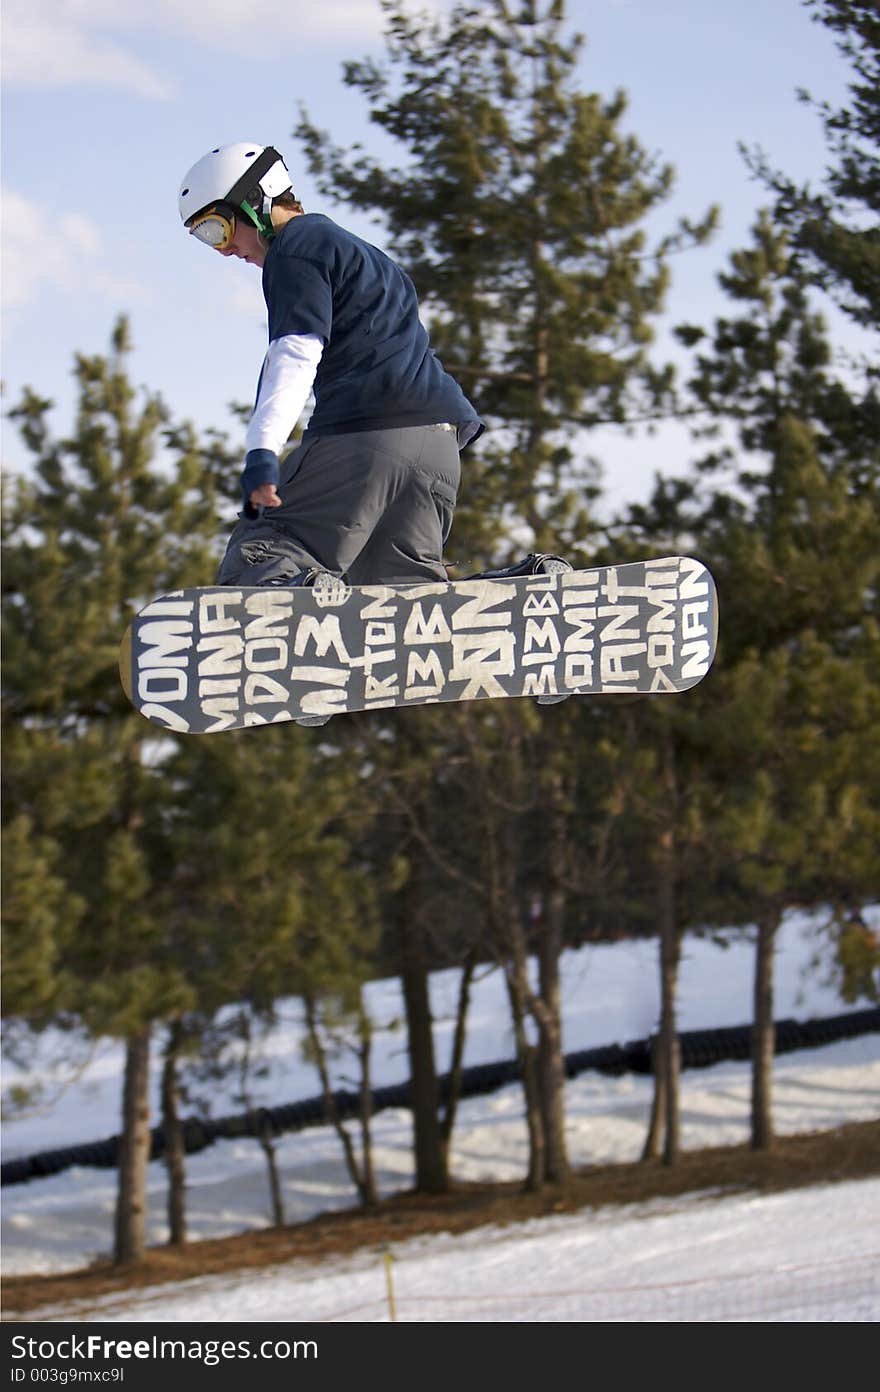 Snowboarder Launching off Jump